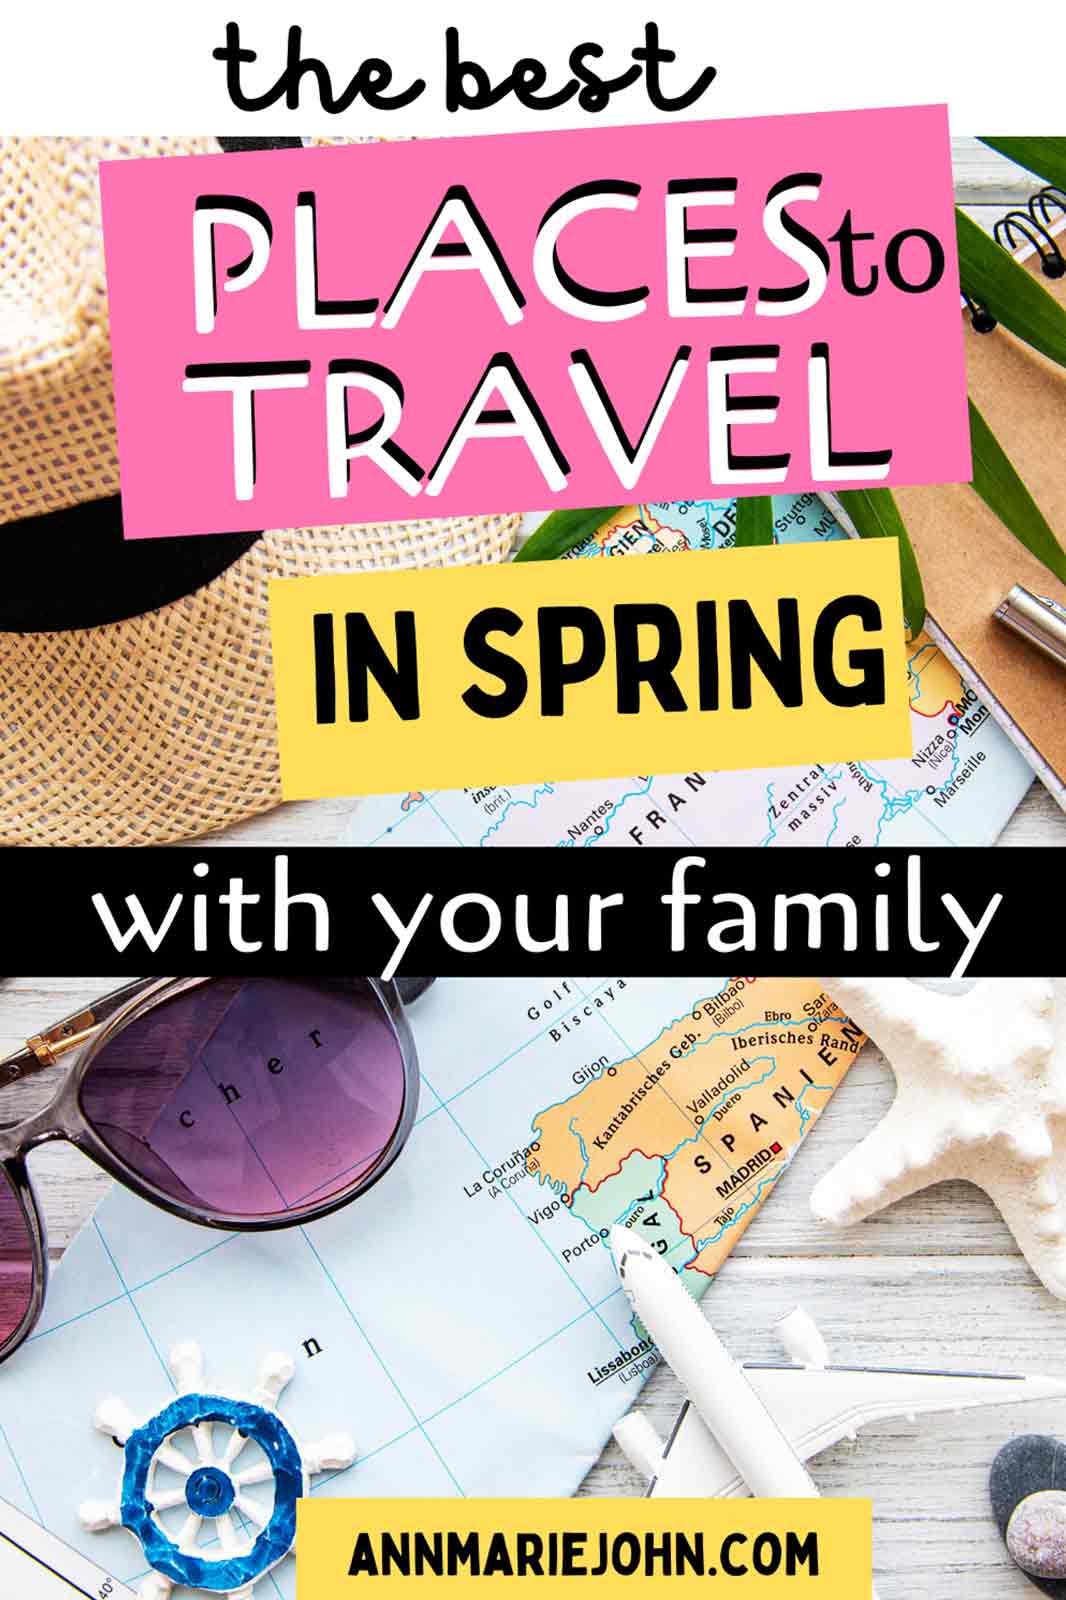 The Best Places to Travel in Spring With Your Family